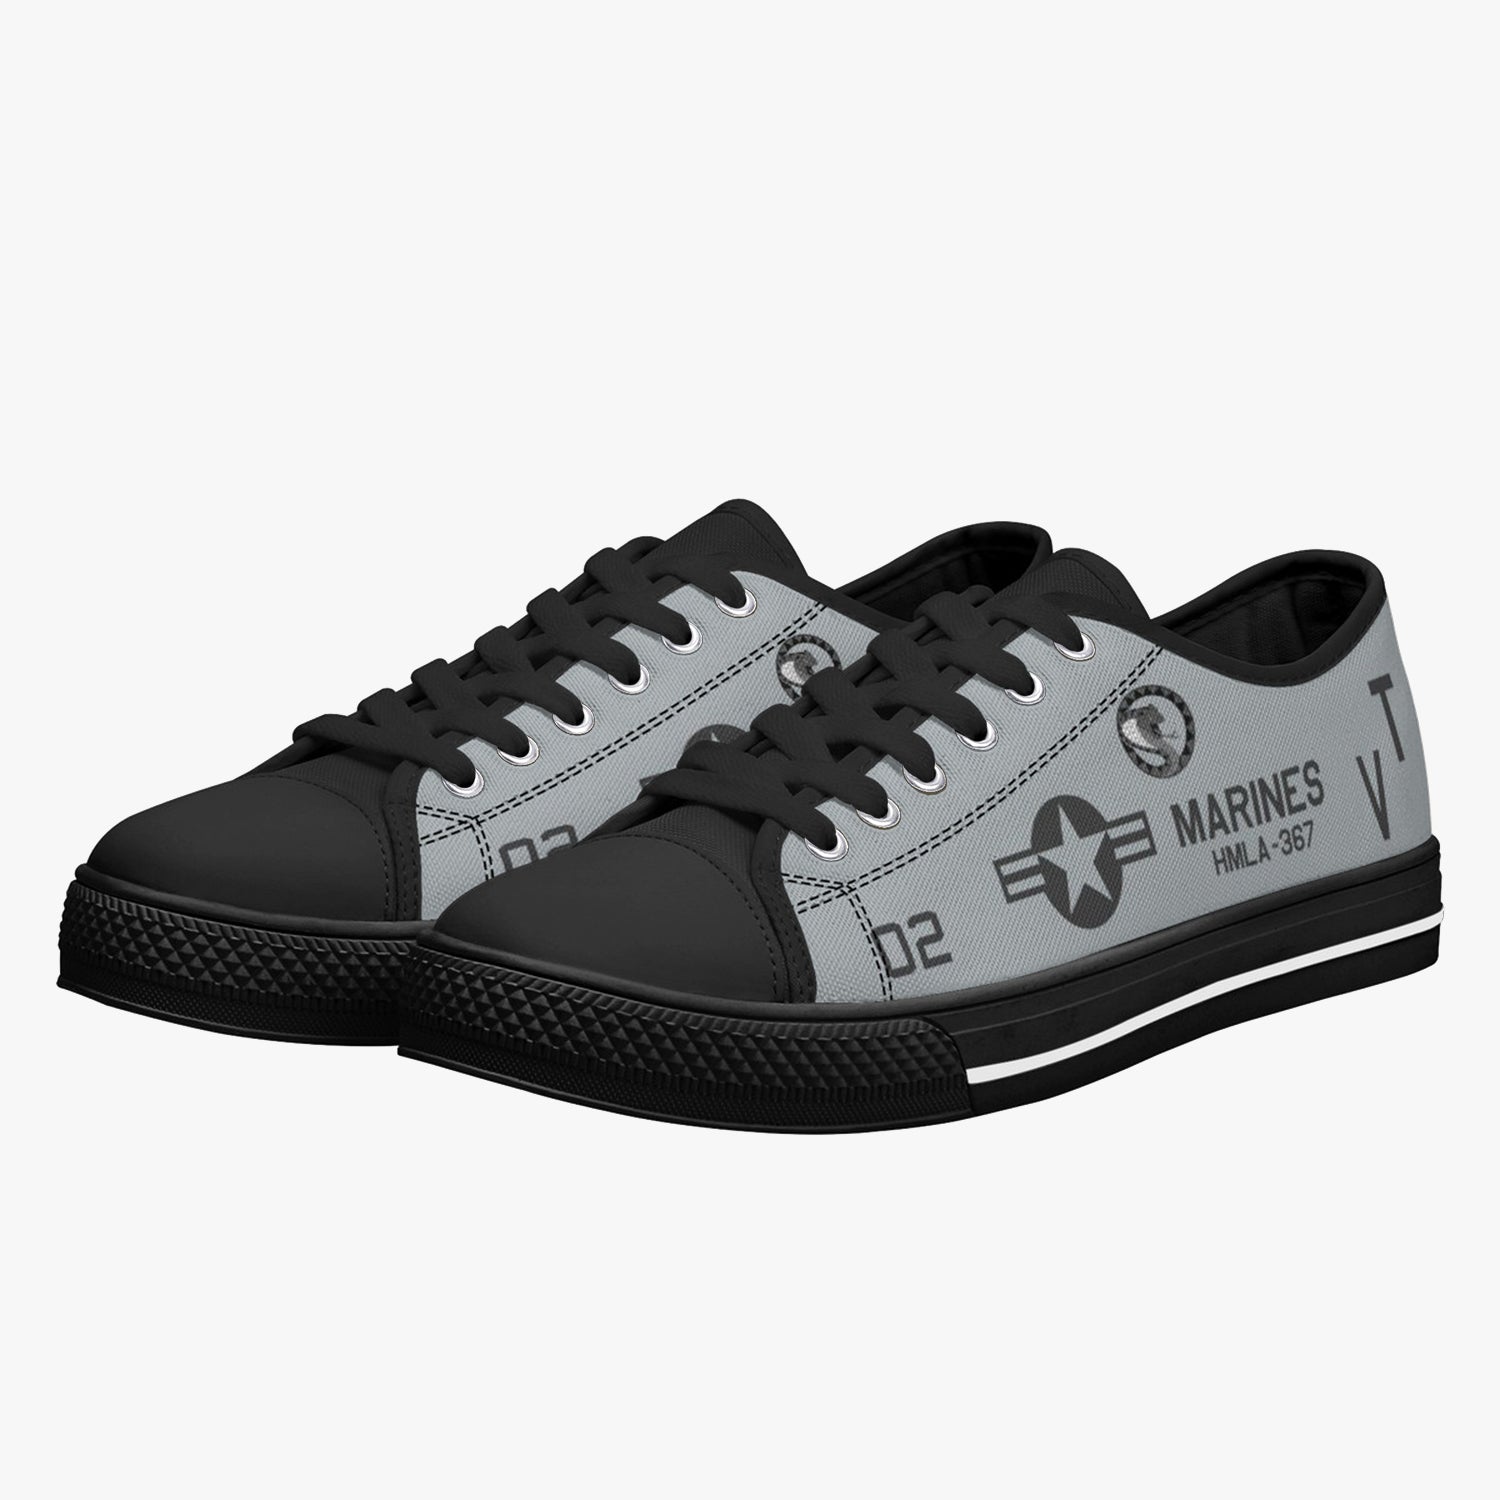 HMLA-367 "Scarface" Low Top Canvas Shoes - I Love a Hangar